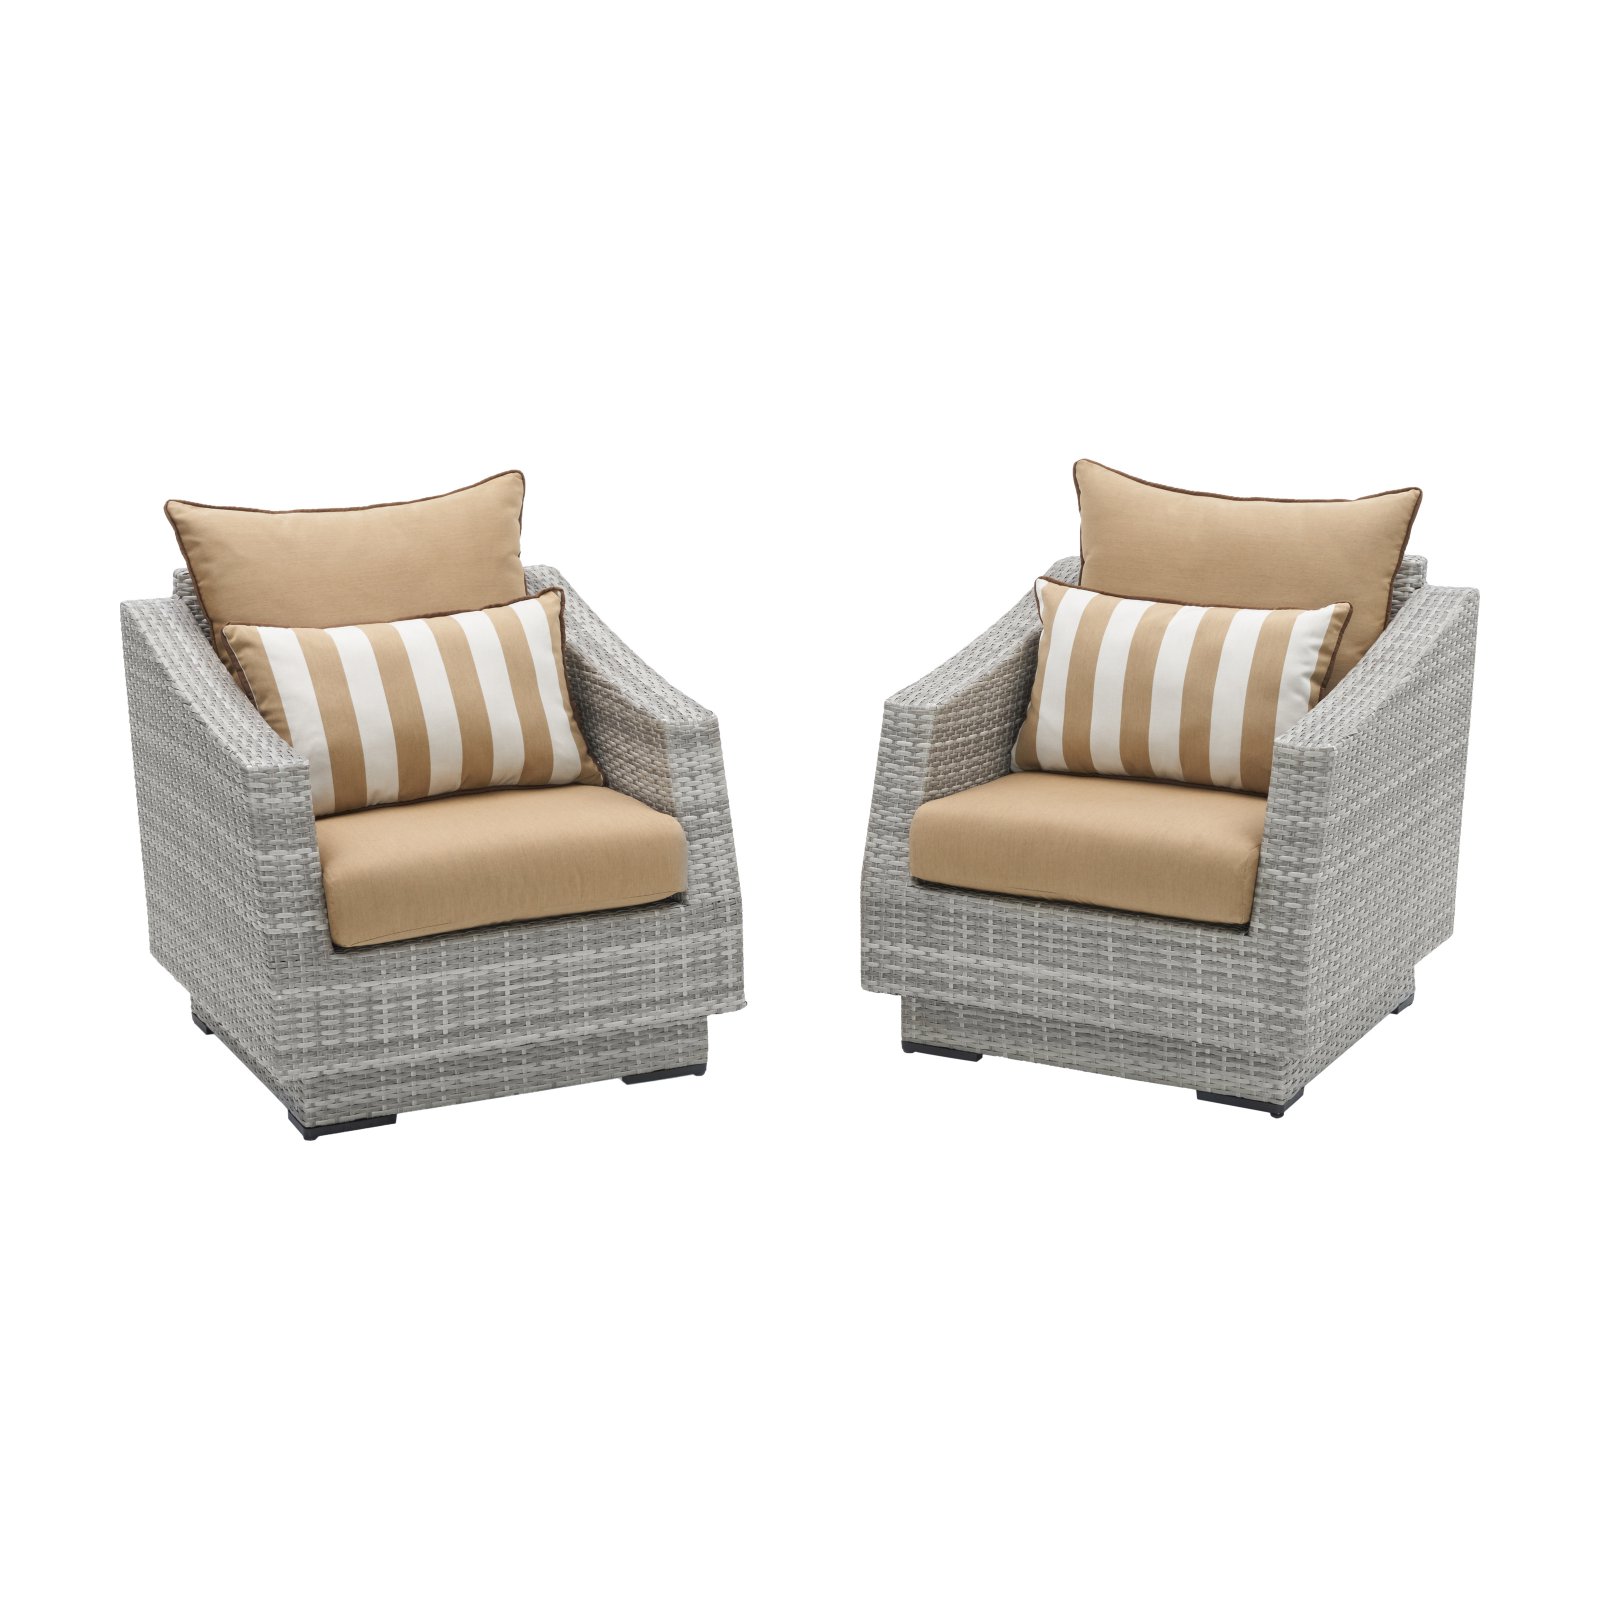 RST Brands Cannes Sunbrella Club Chair - Set of 2 - image 2 of 11